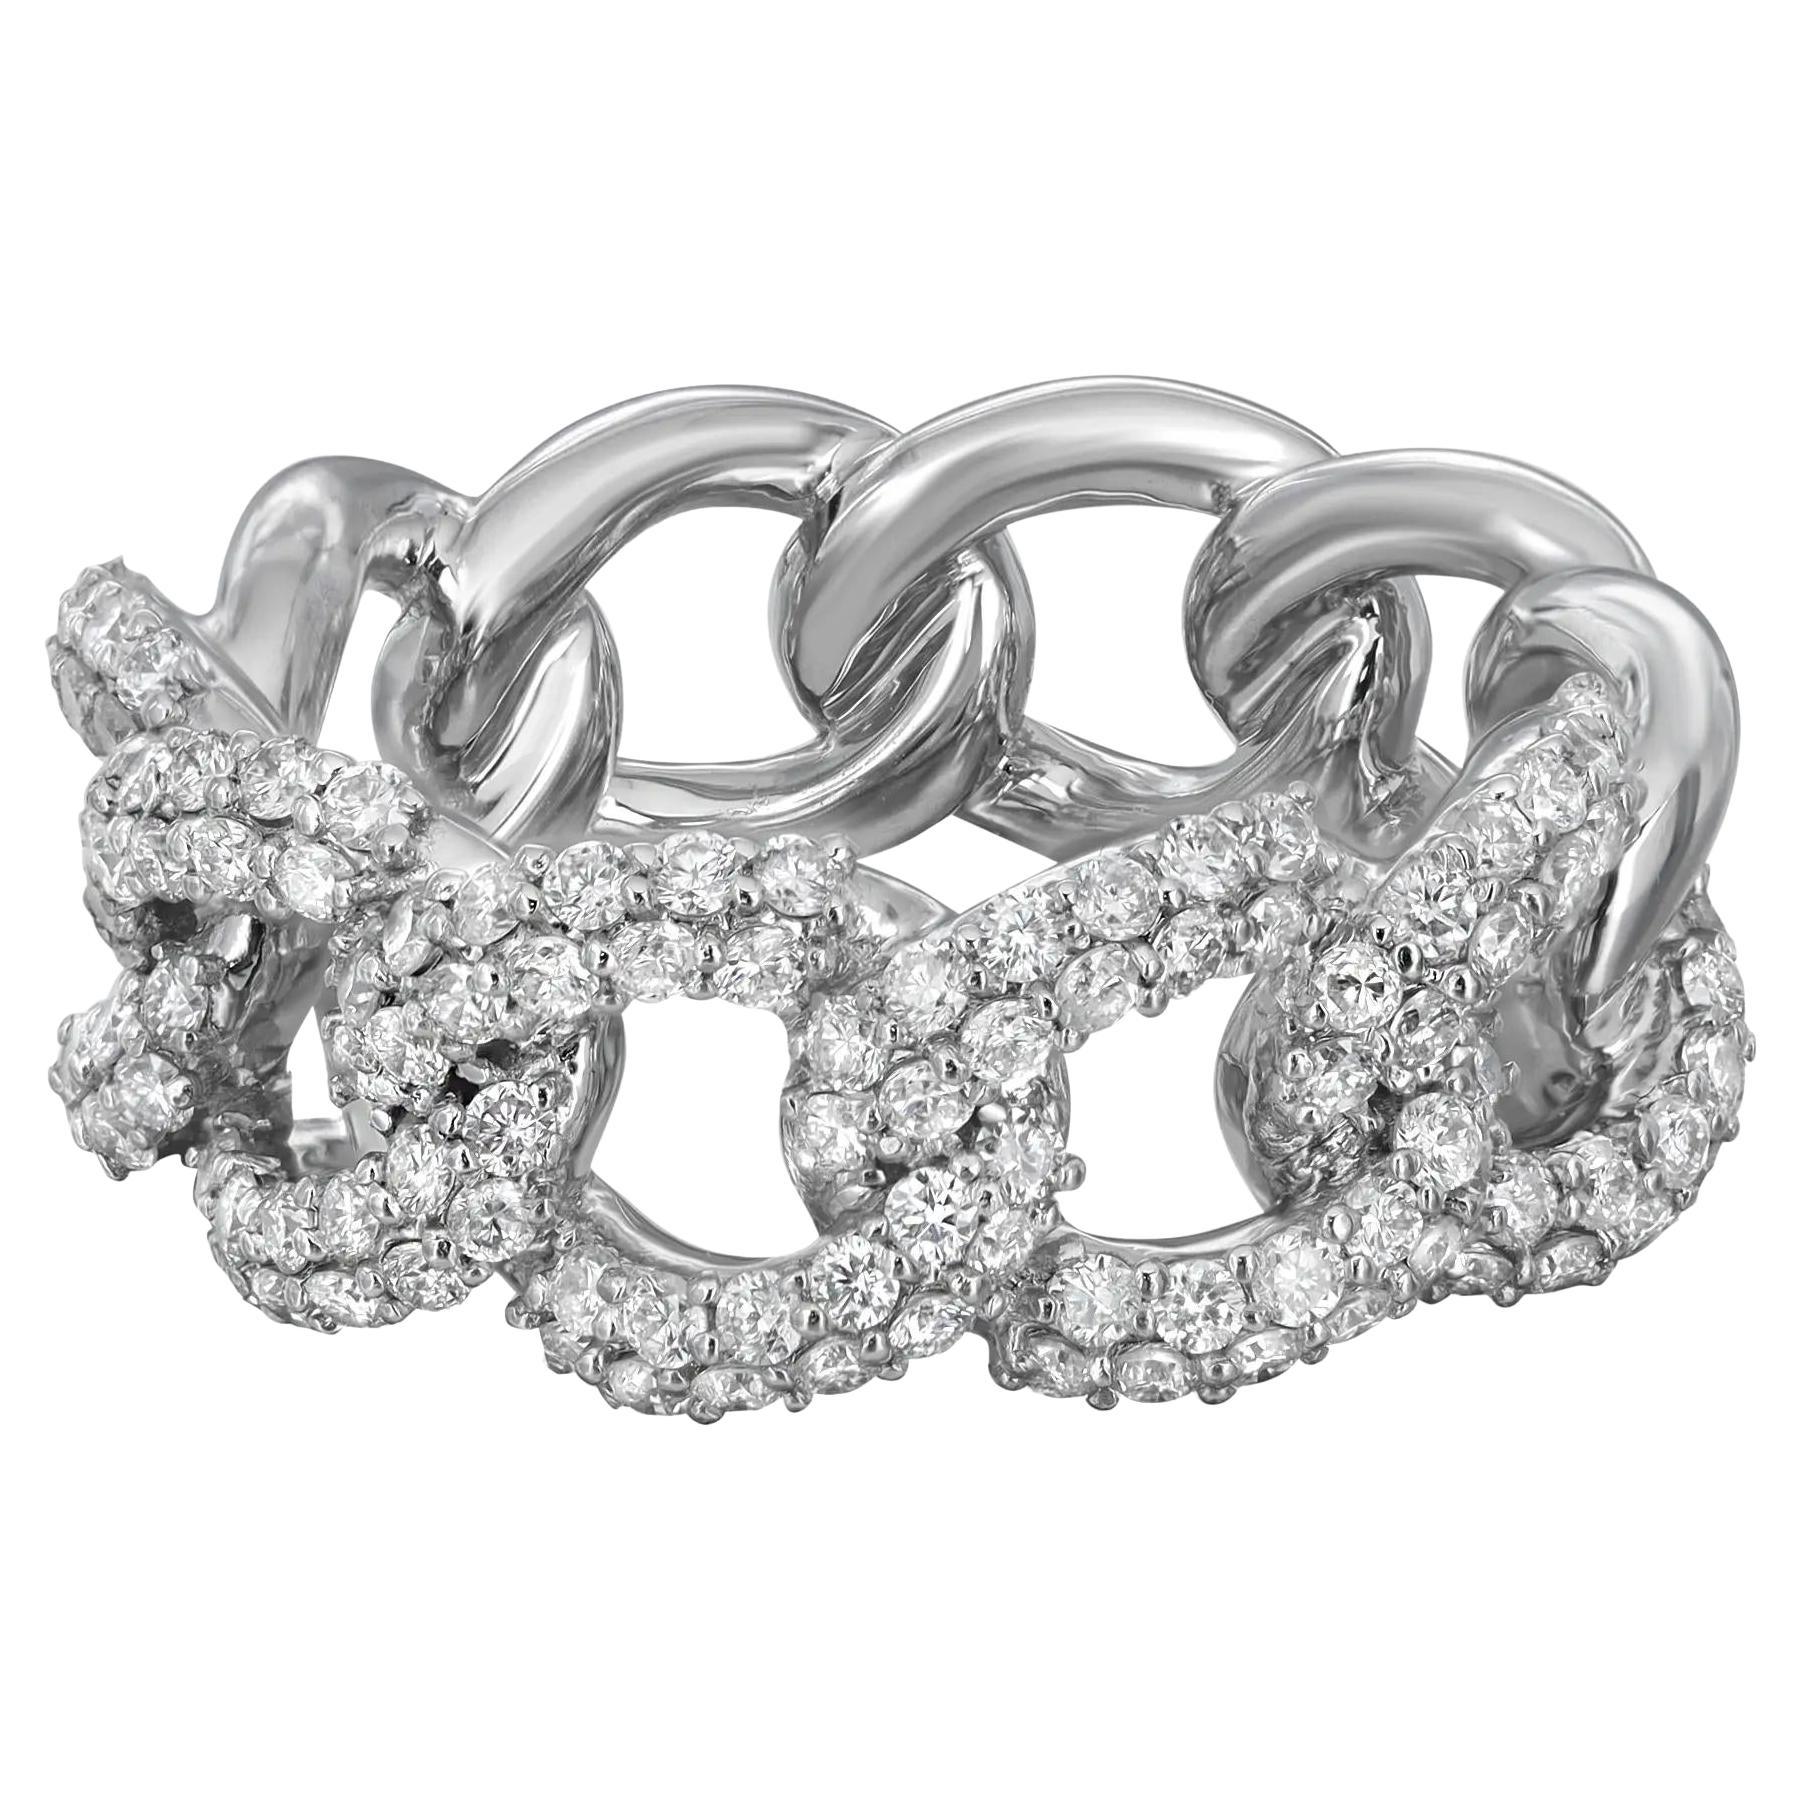 0.95cttw Pave Set Diamond Chain Link Band Ring 18k White Gold For Sale